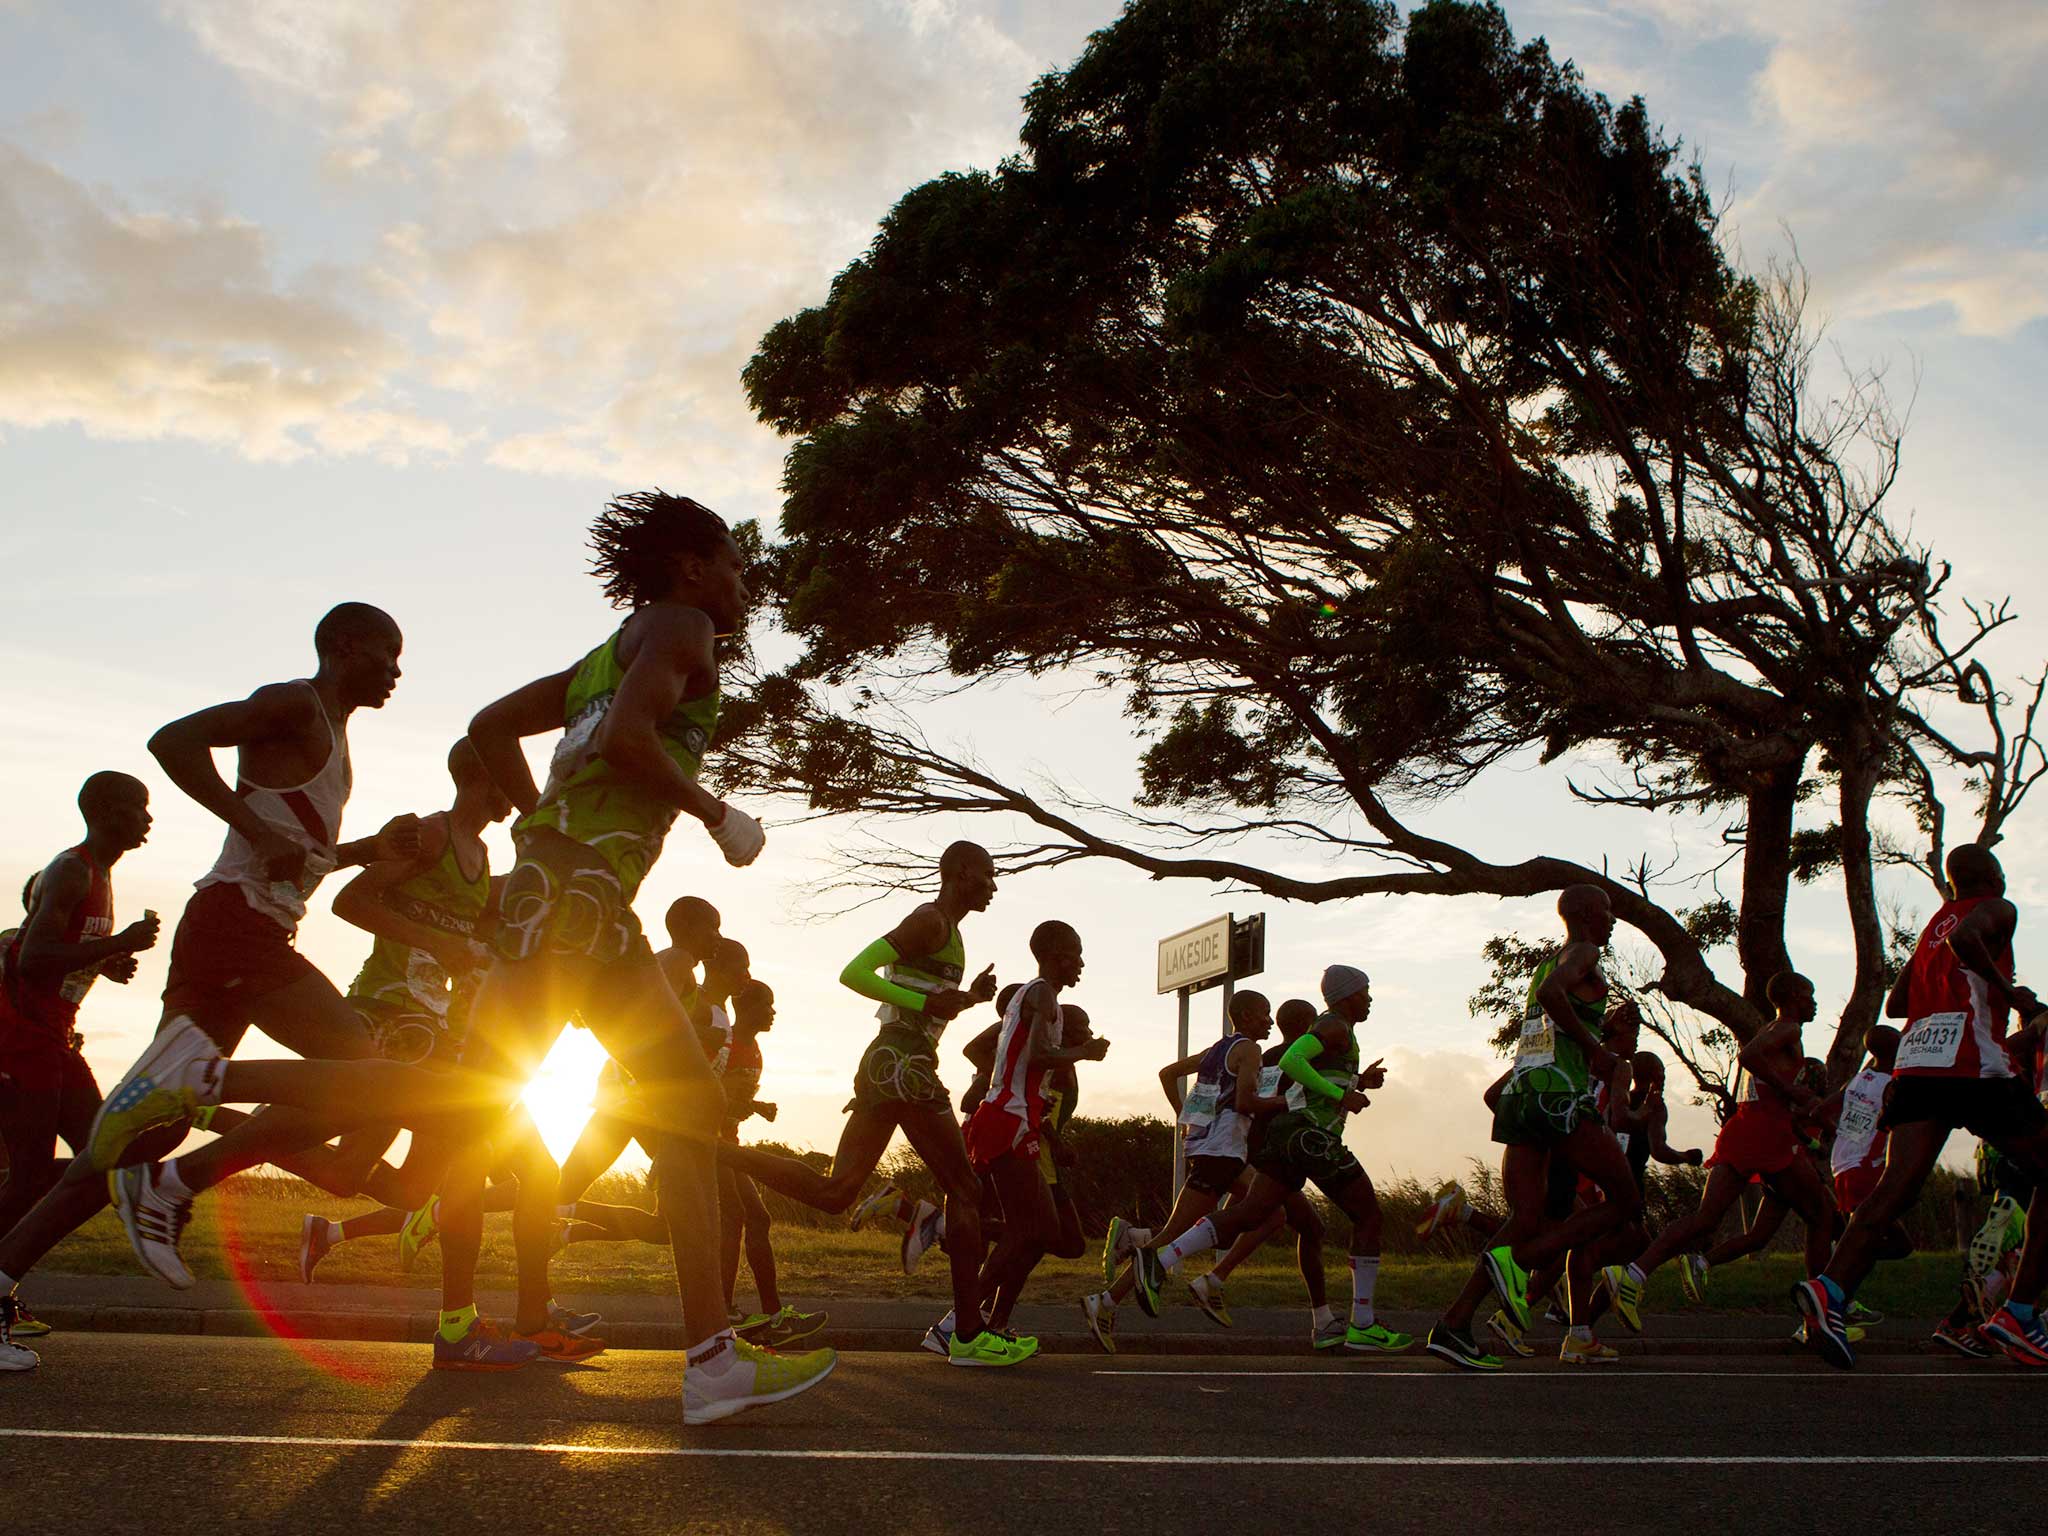 The Old Mutual Two Oceans Ultra Marathon in Cape Town, South Africa spans 34.8 miles